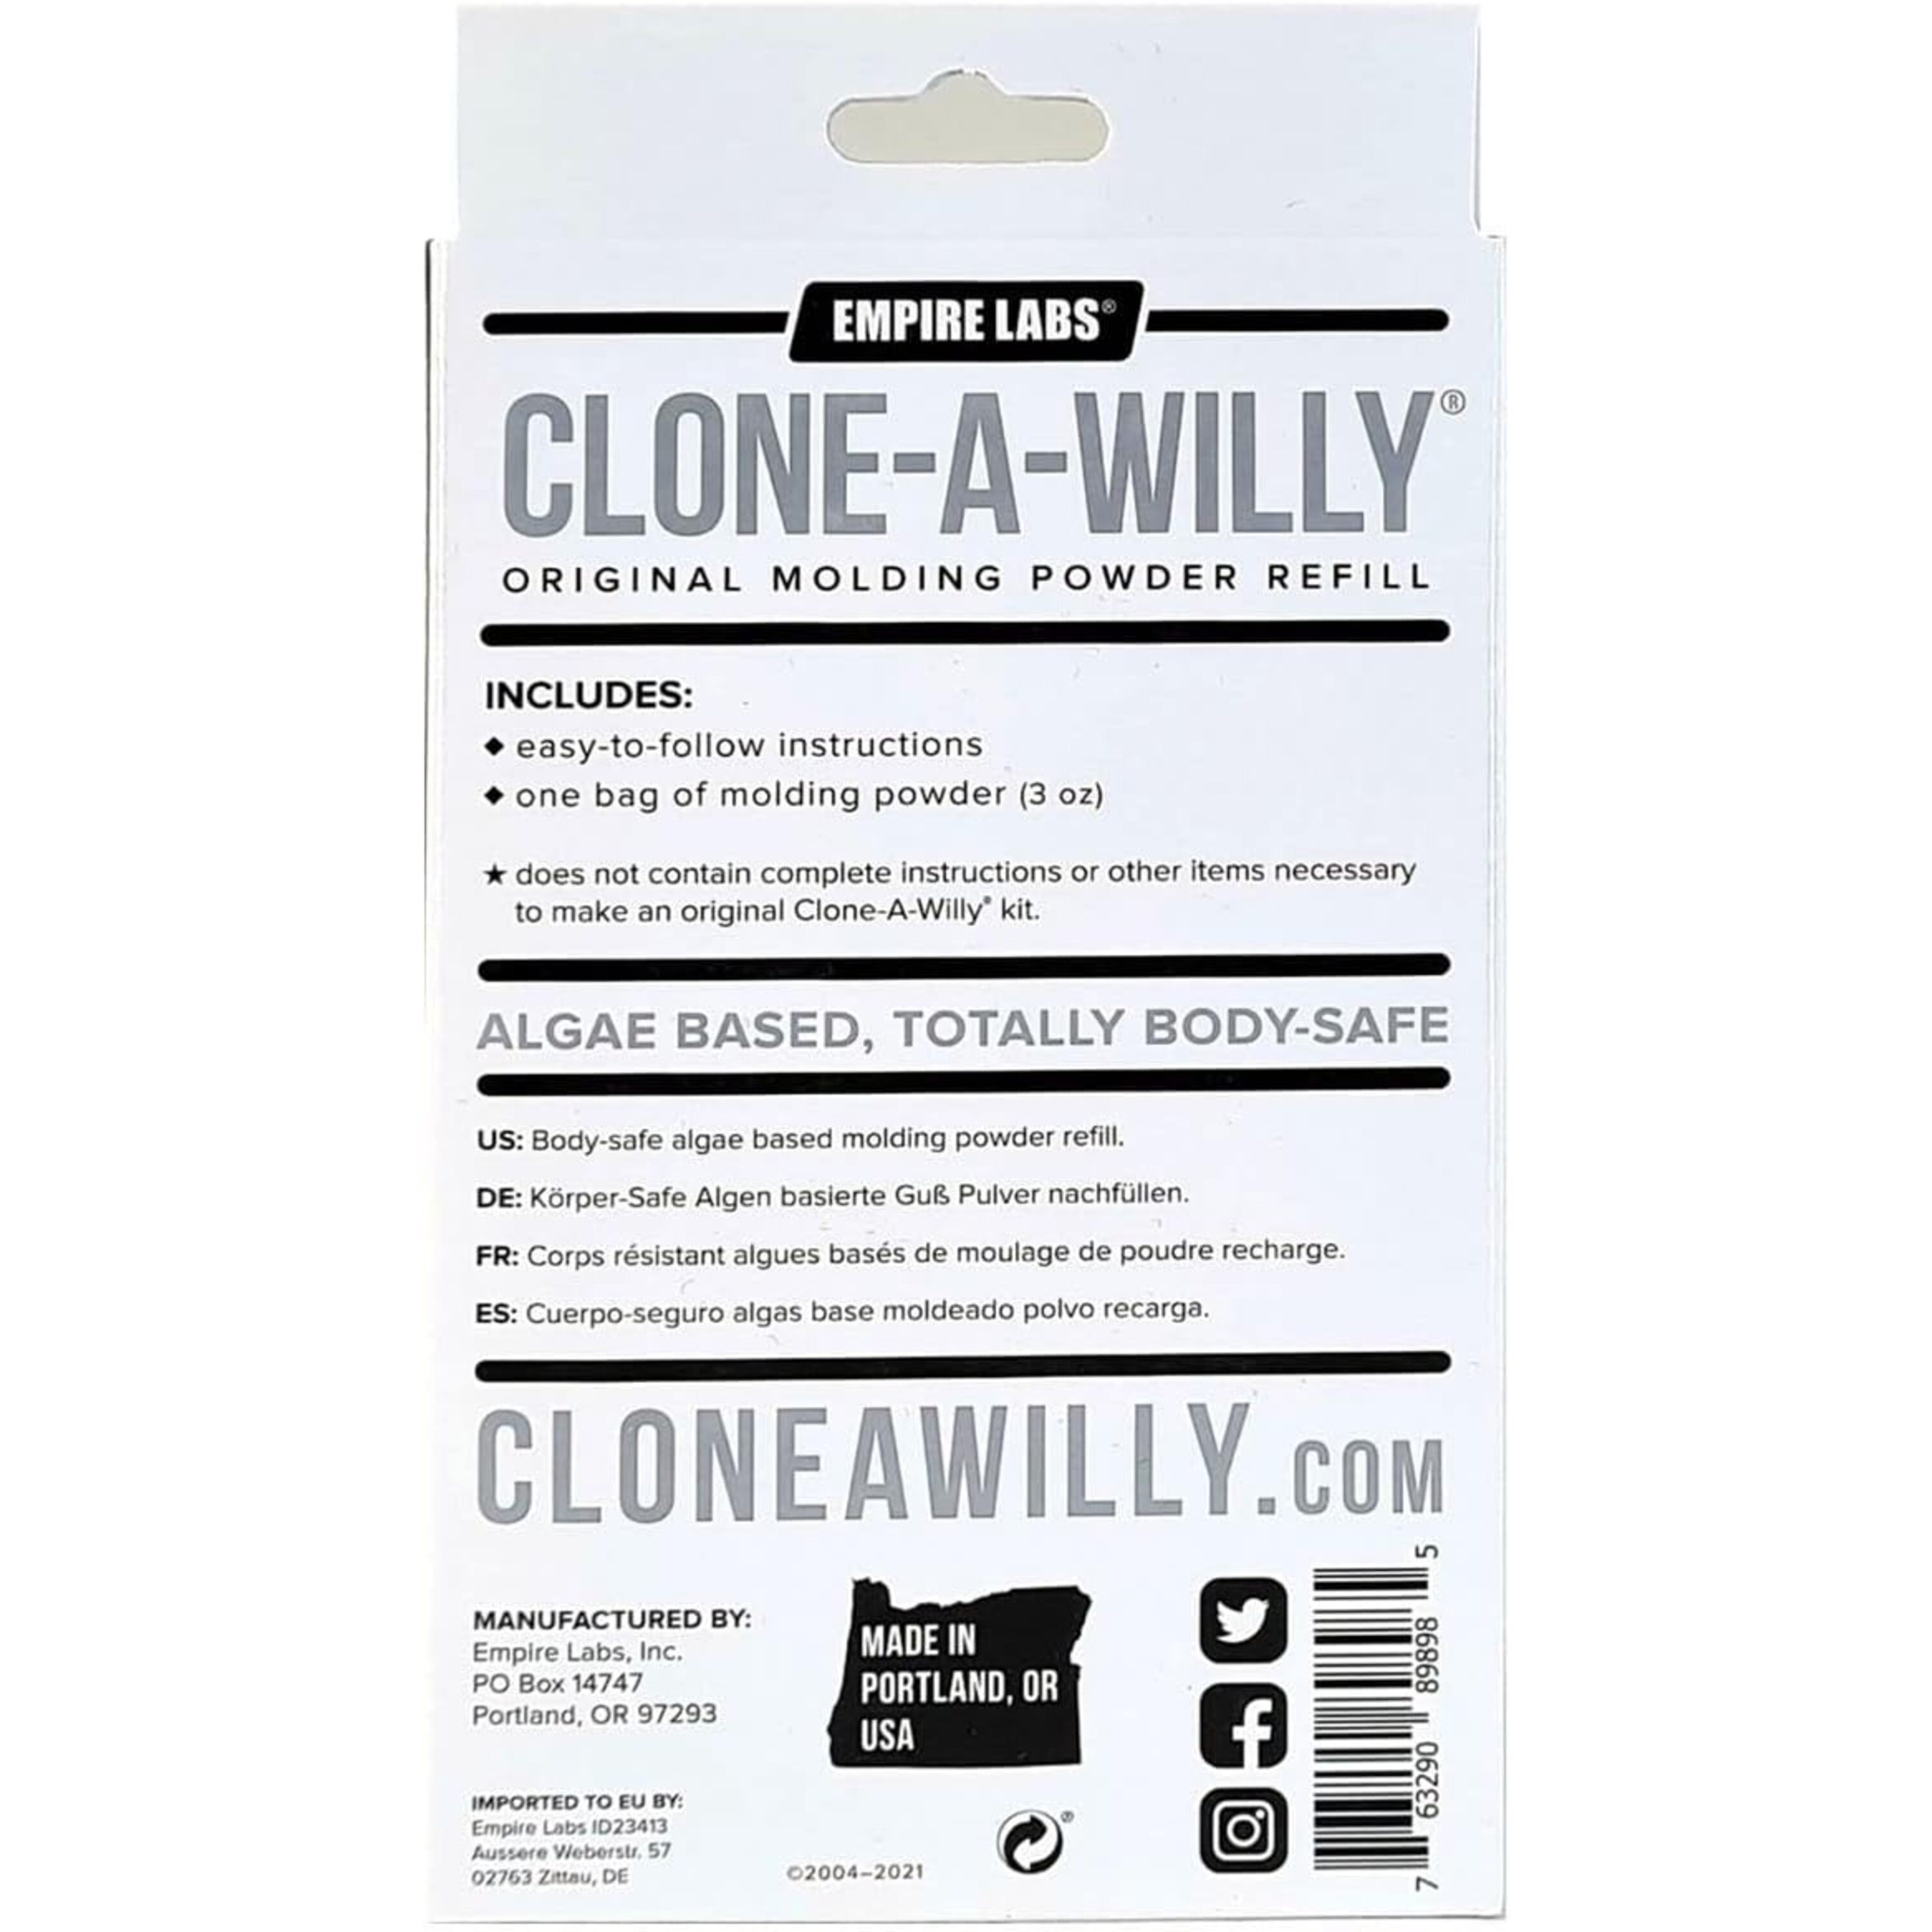 Clone-A-Willy Molding Powder Refill Bag, Erotes.fr